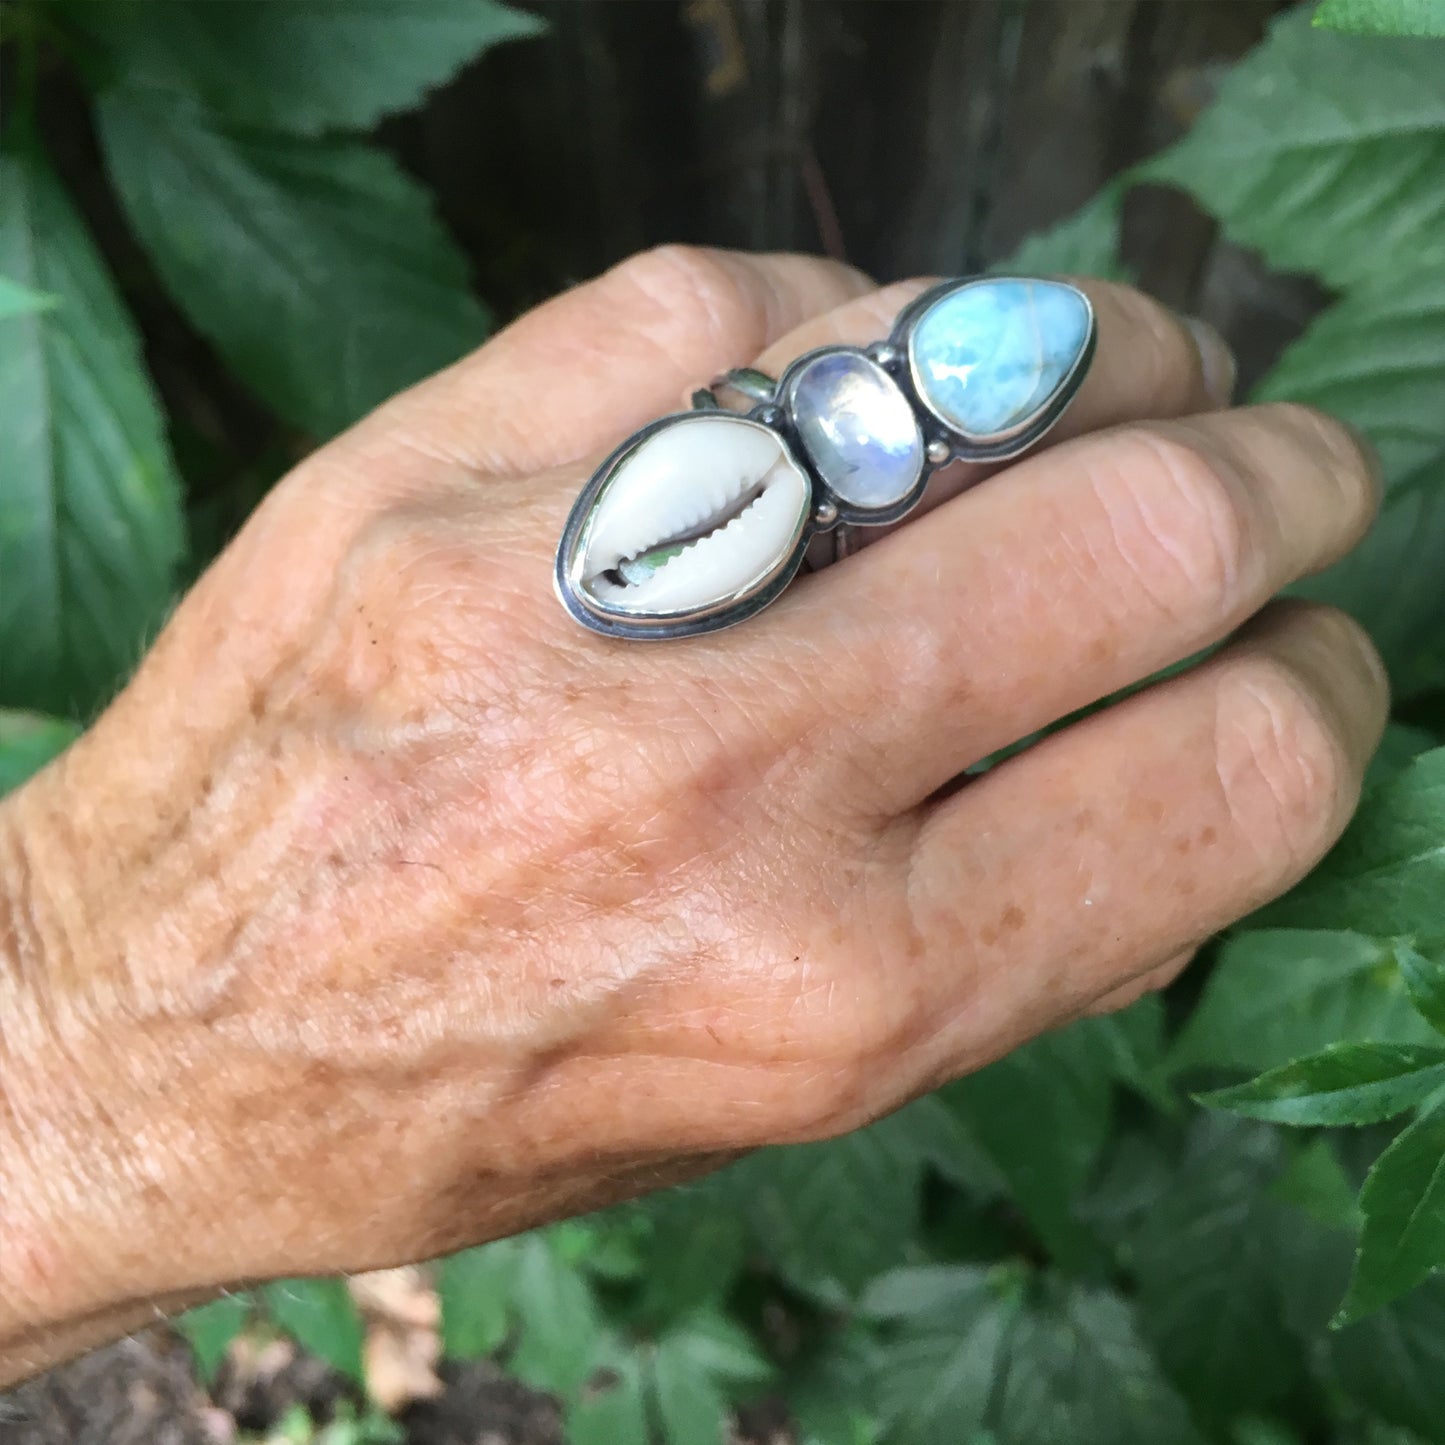 Traveler Trio Ring with Larimar, Rainbow Moonstone and Cowrie Shell Shown on Hand